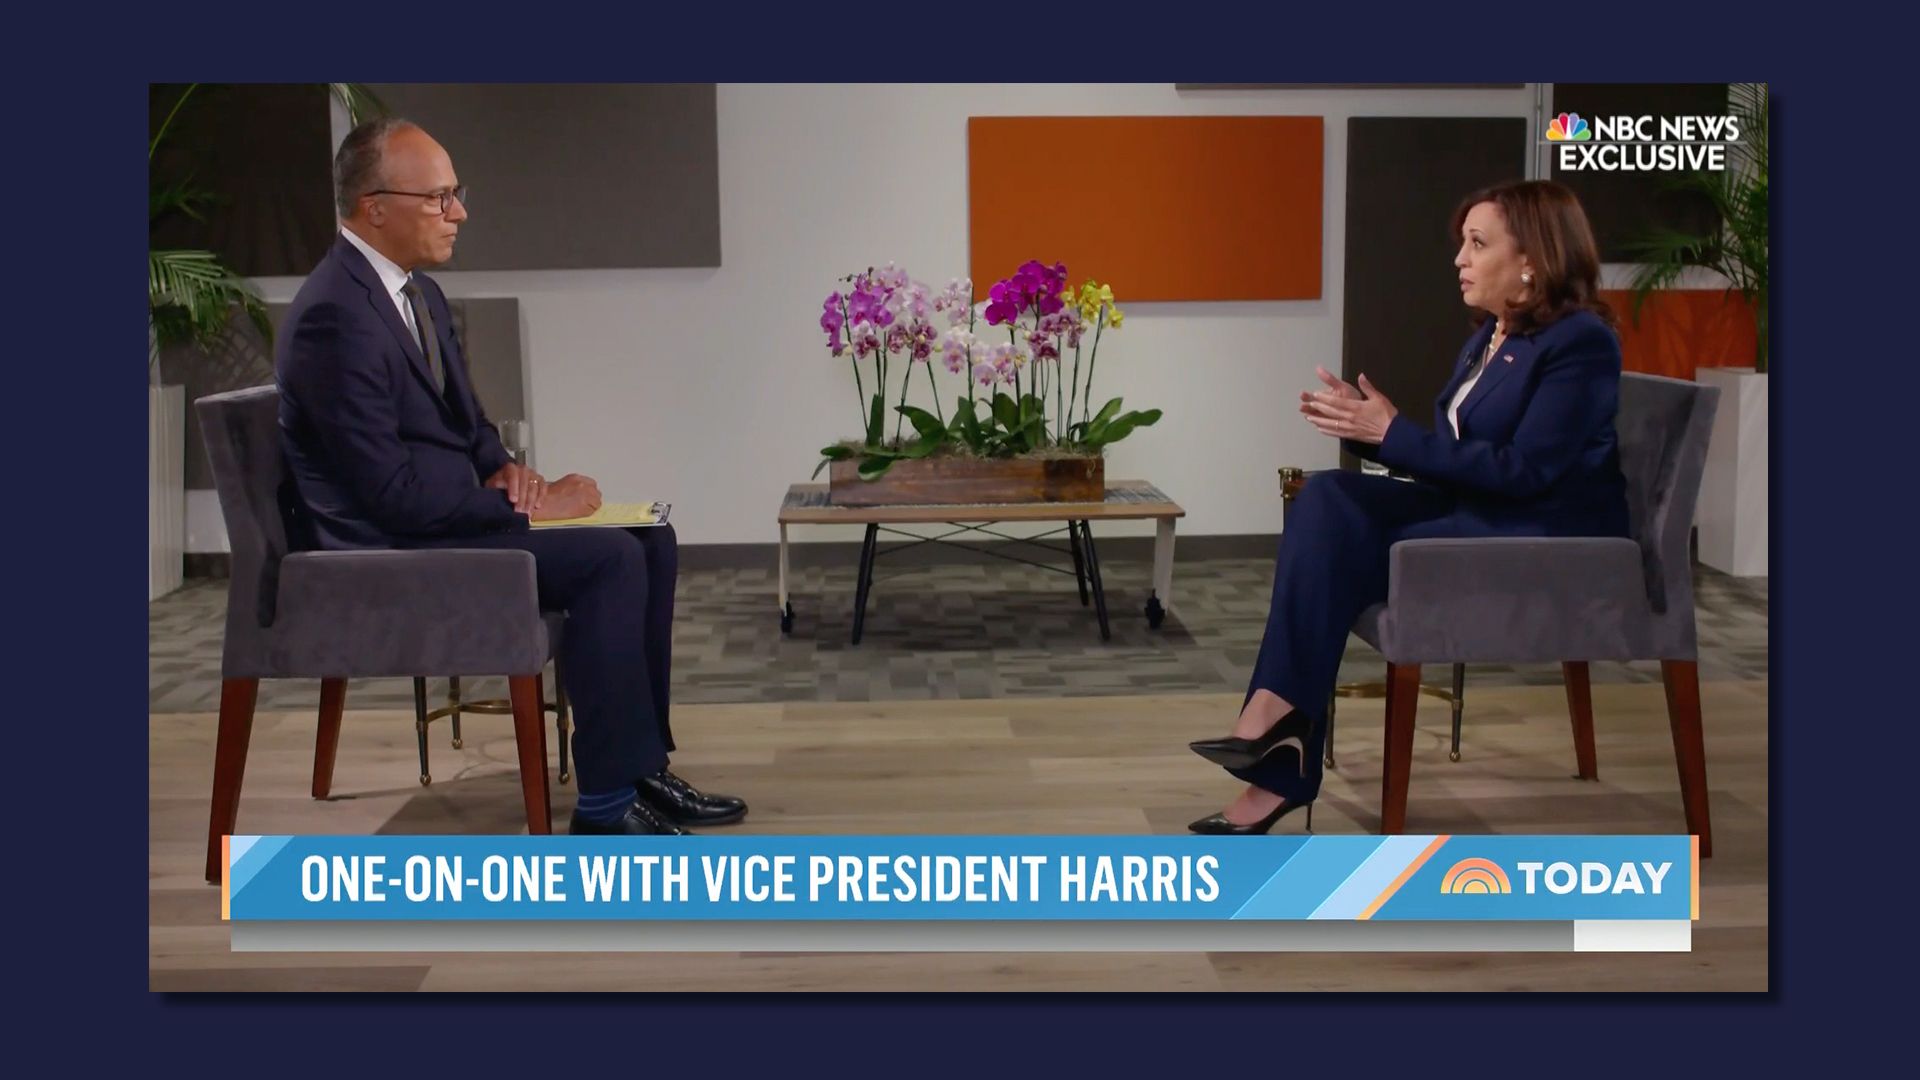 Vice President Kamala Harris is seen in a screenshot of her interview with NBC News anchor Lester Holt